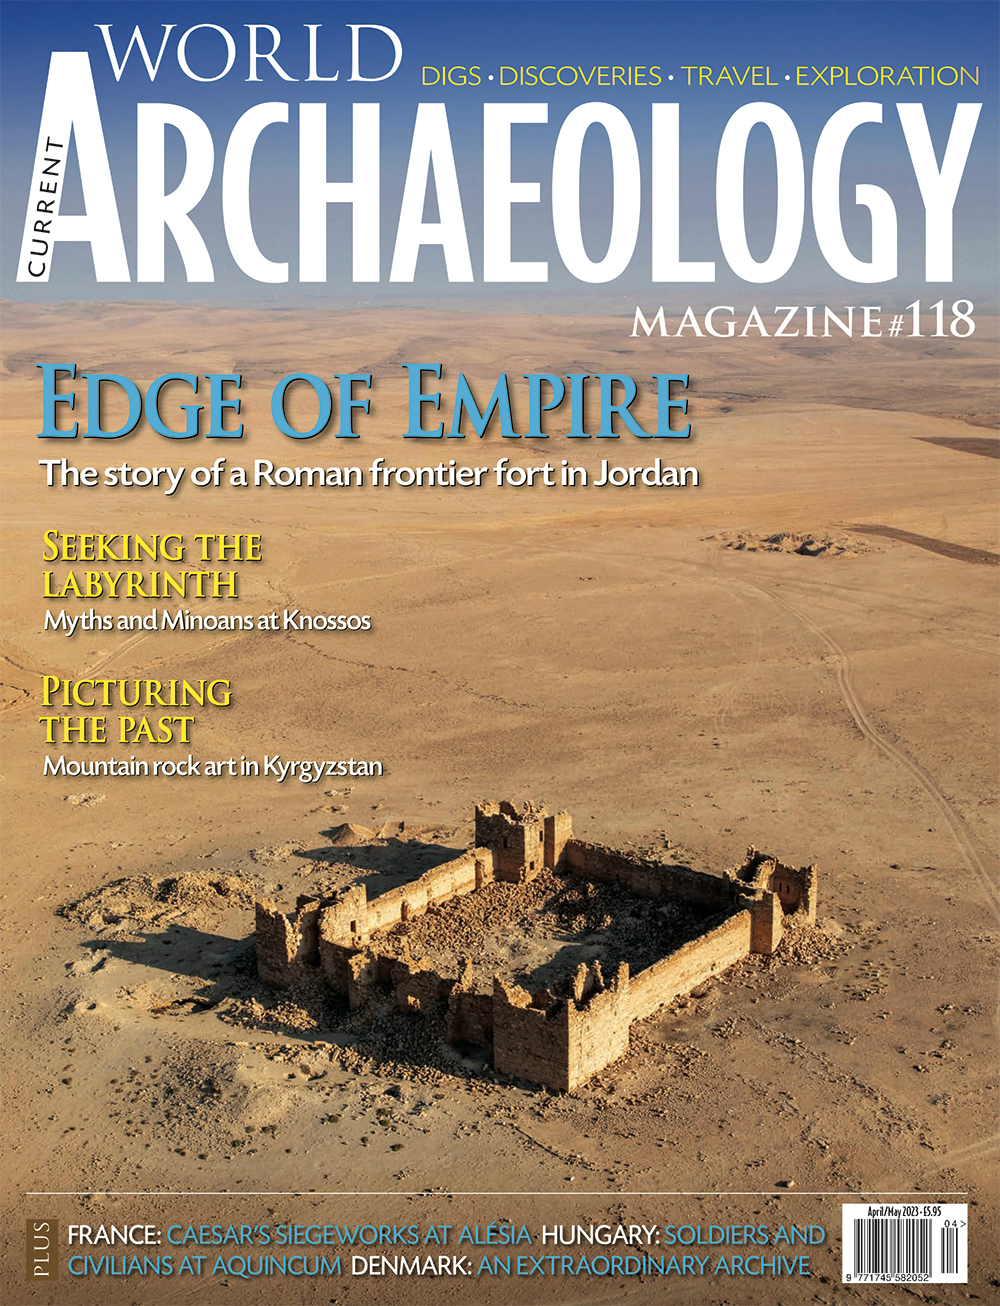 Current World Archaeology issue 118